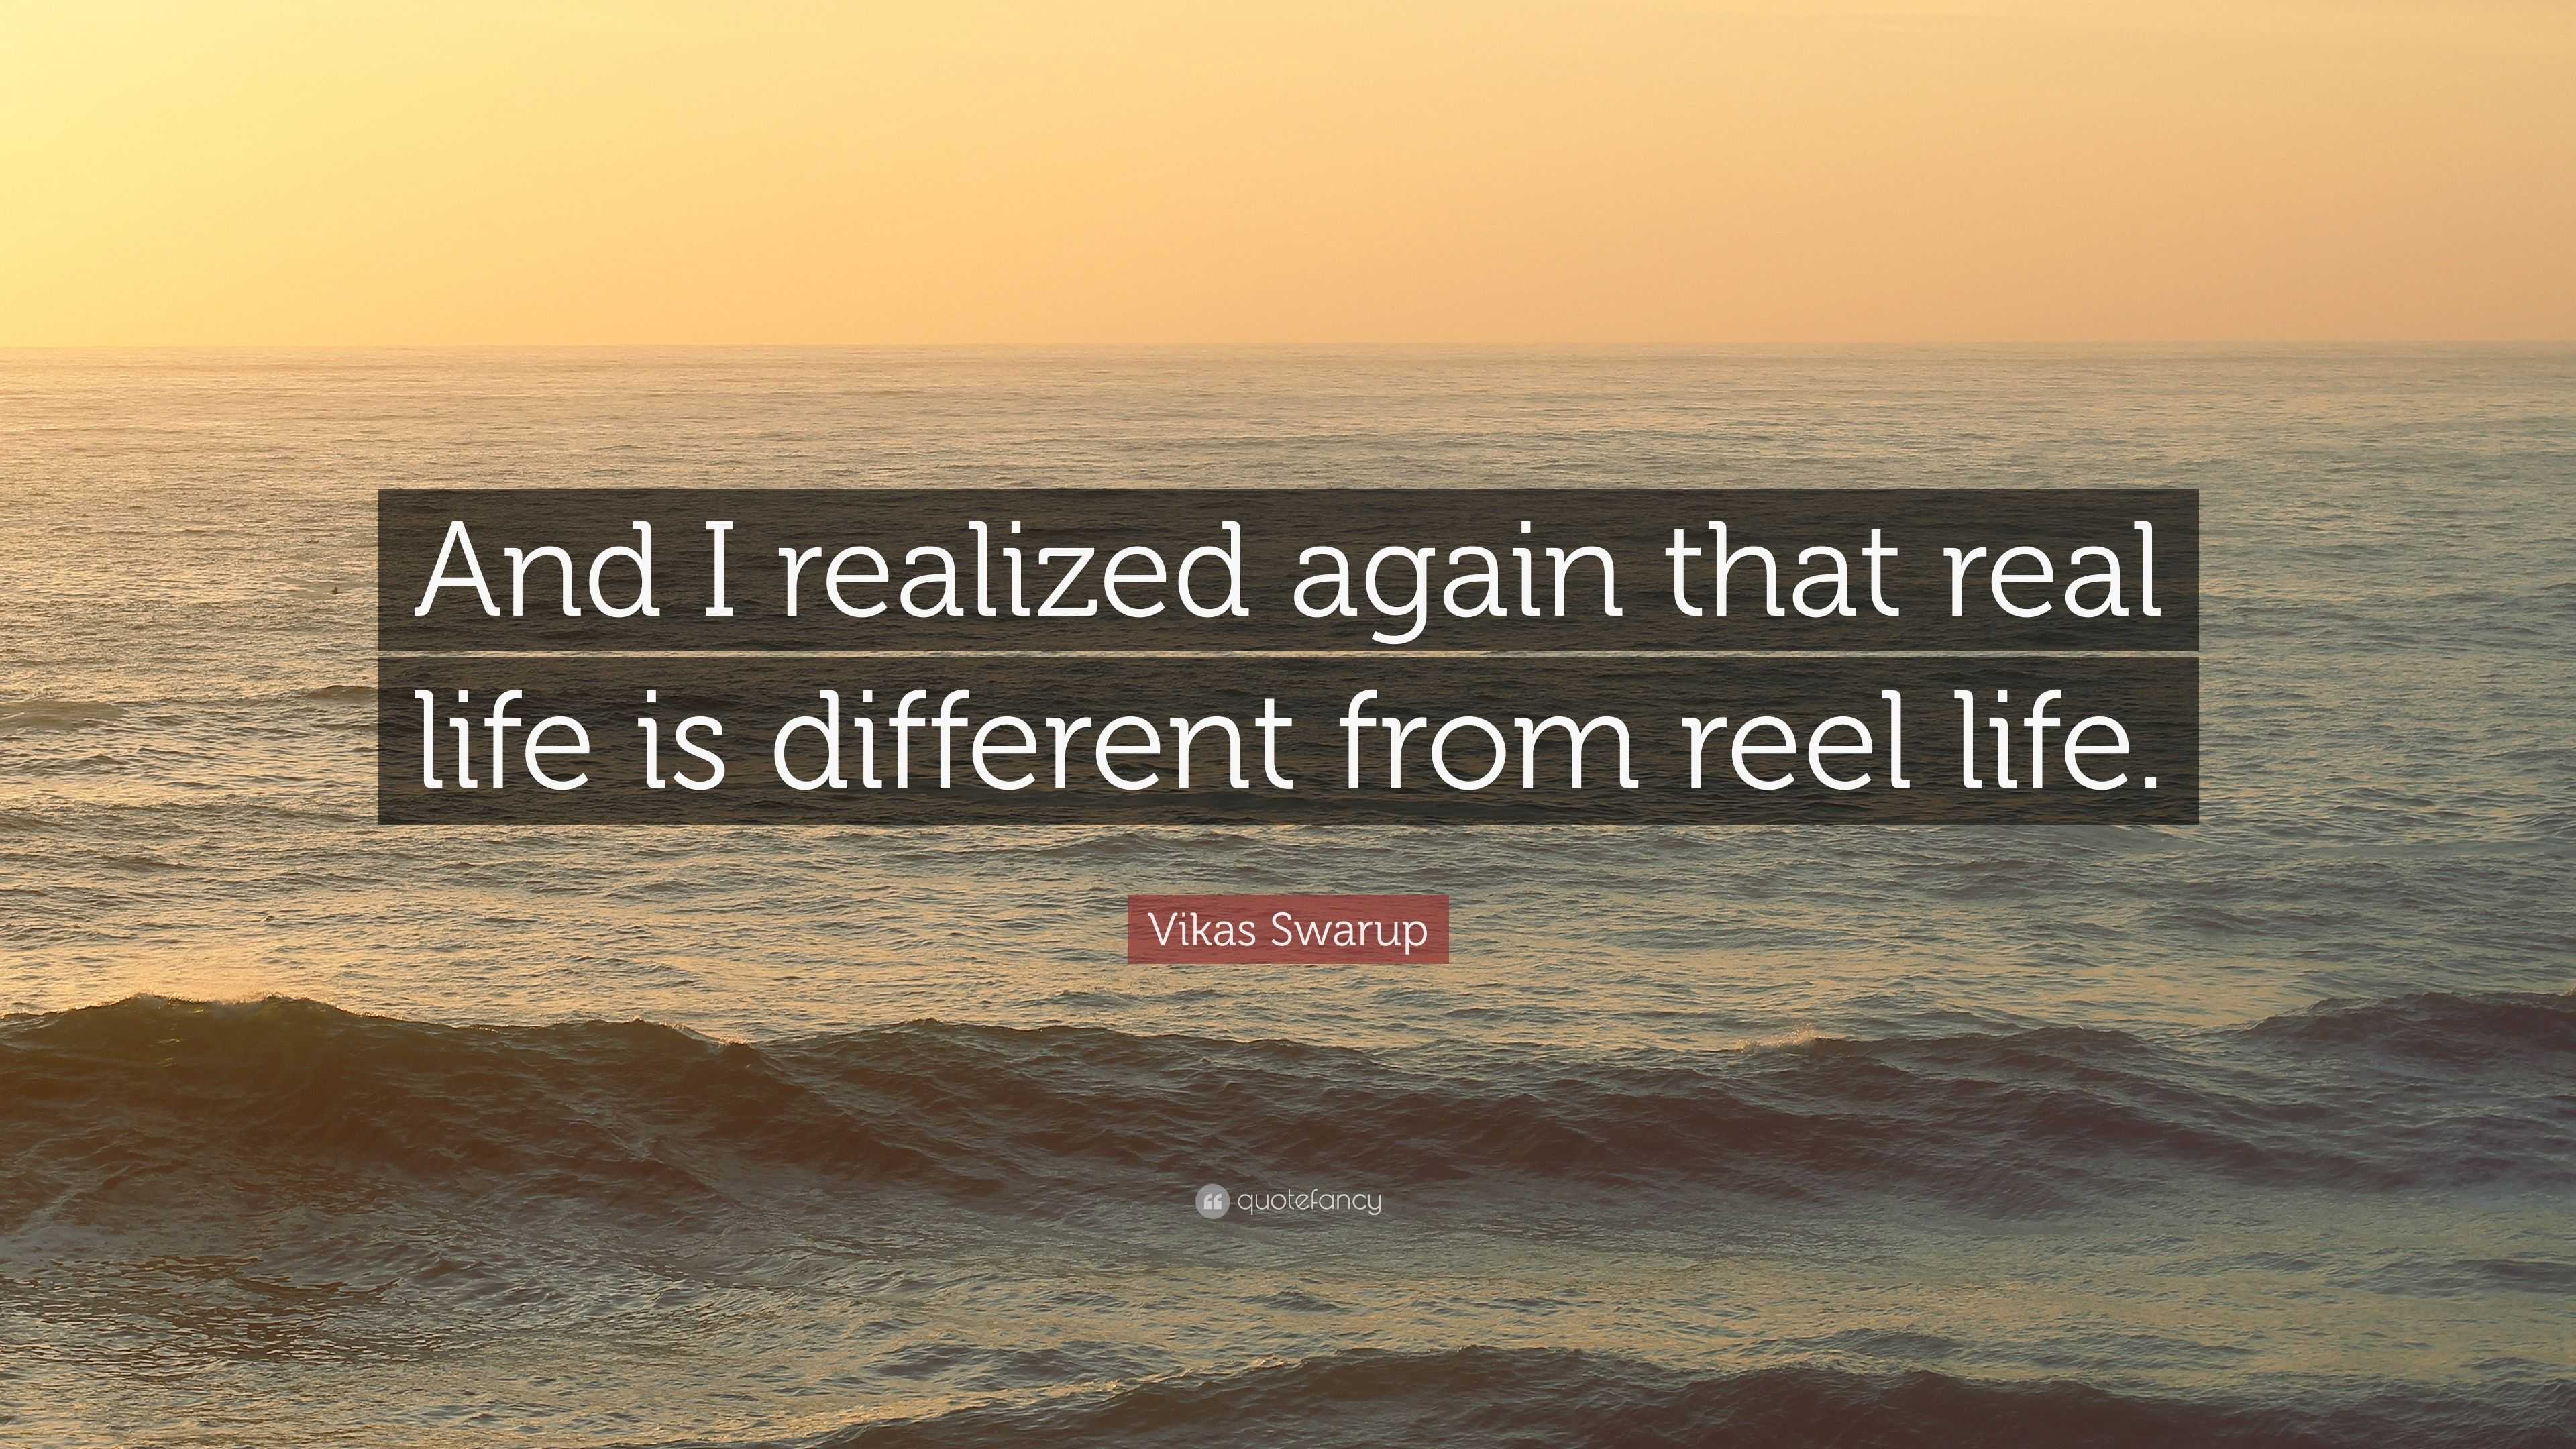 Vikas Swarup Quote “And I realized again that real life is different from reel